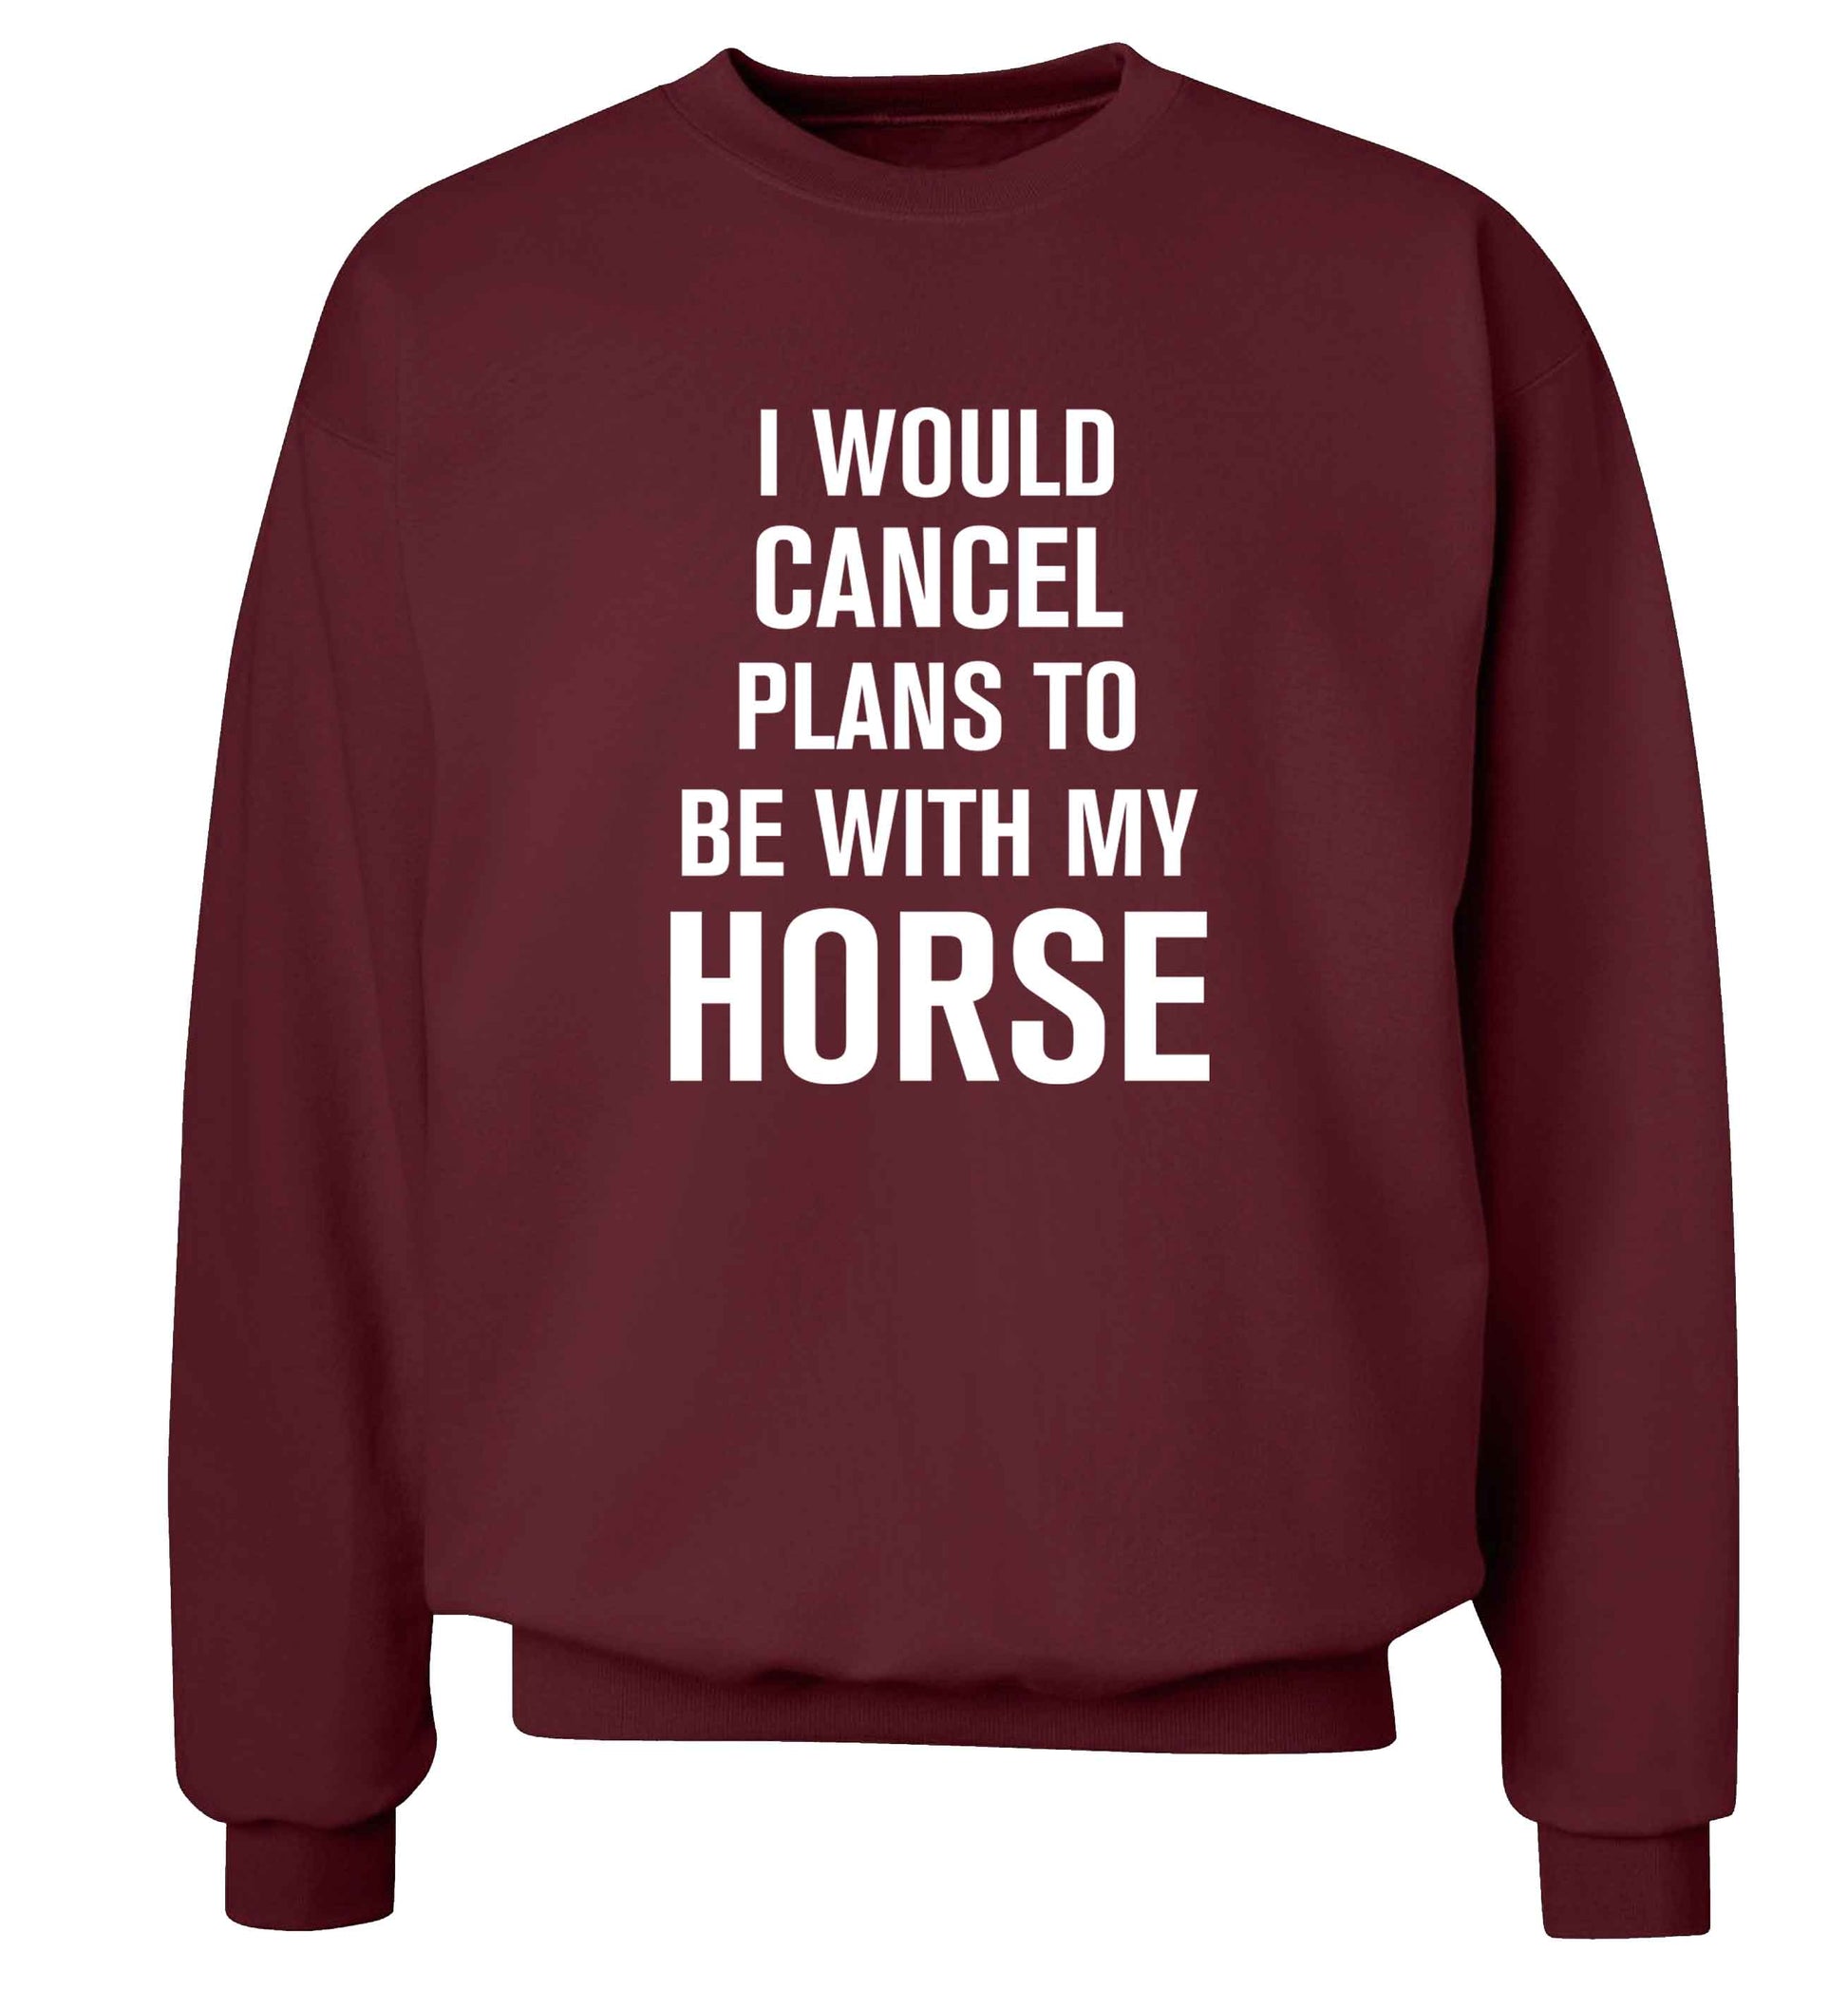 I will cancel plans to be with my horse adult's unisex maroon sweater 2XL